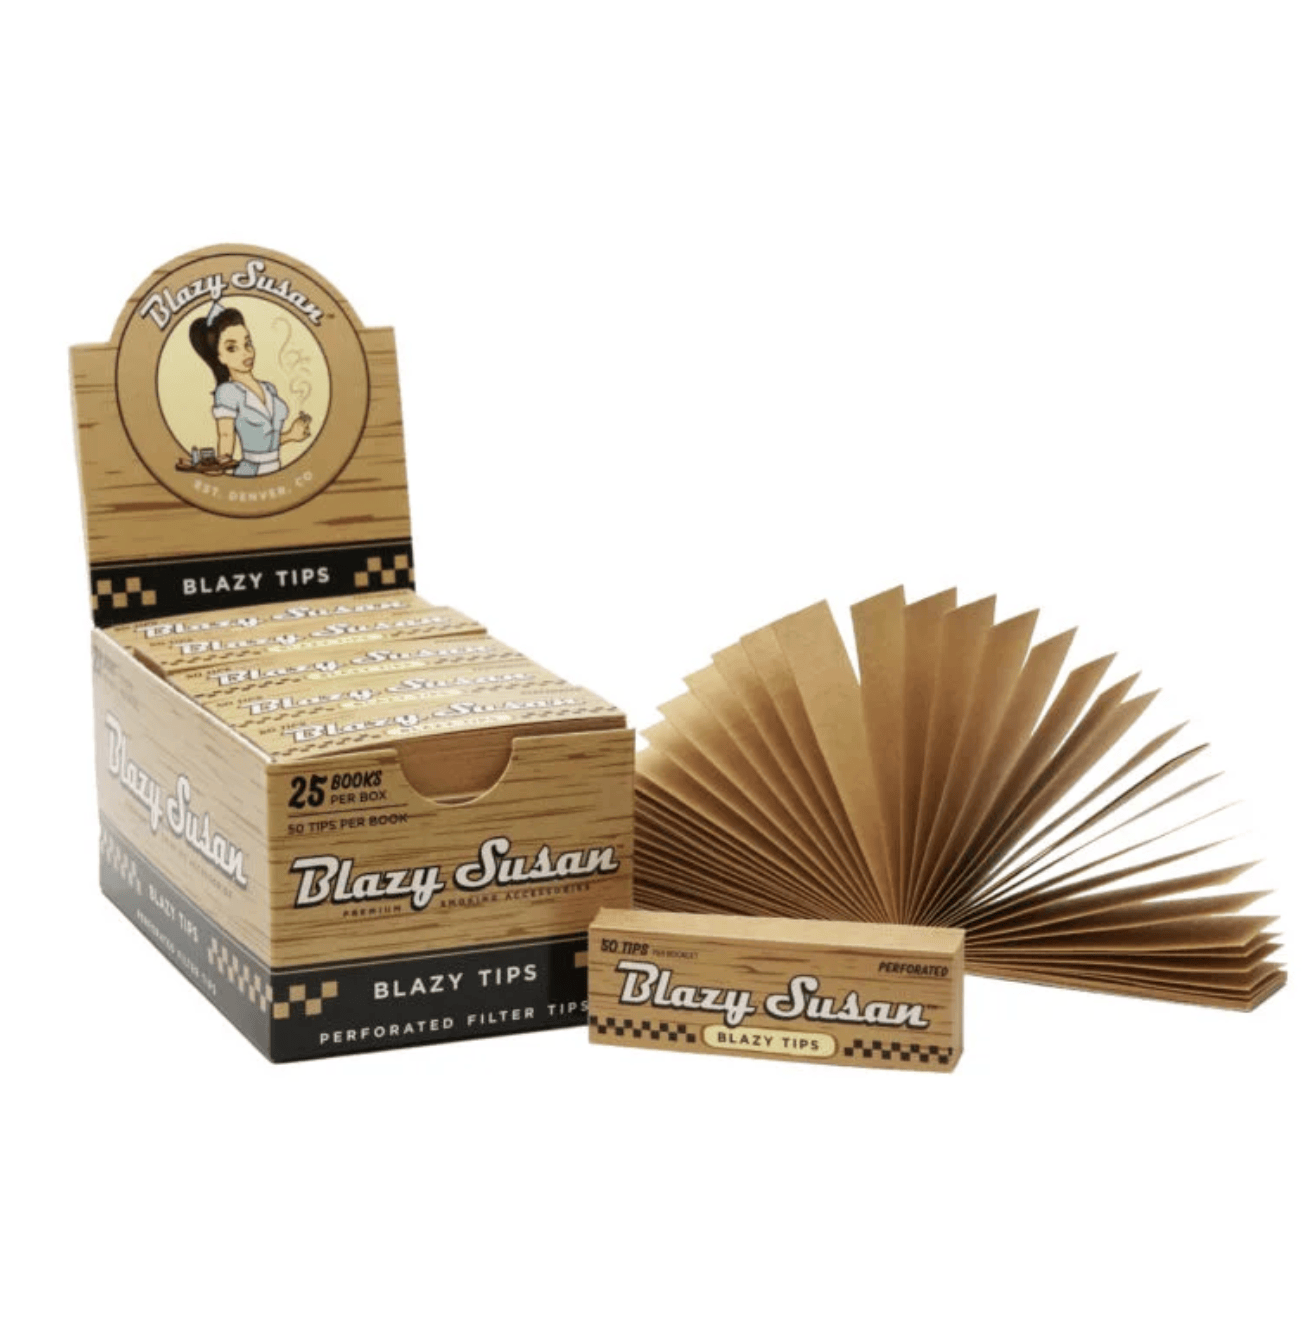 Blazy Suzan Unbleached Filter Tips Perforated - 25 Books per Box